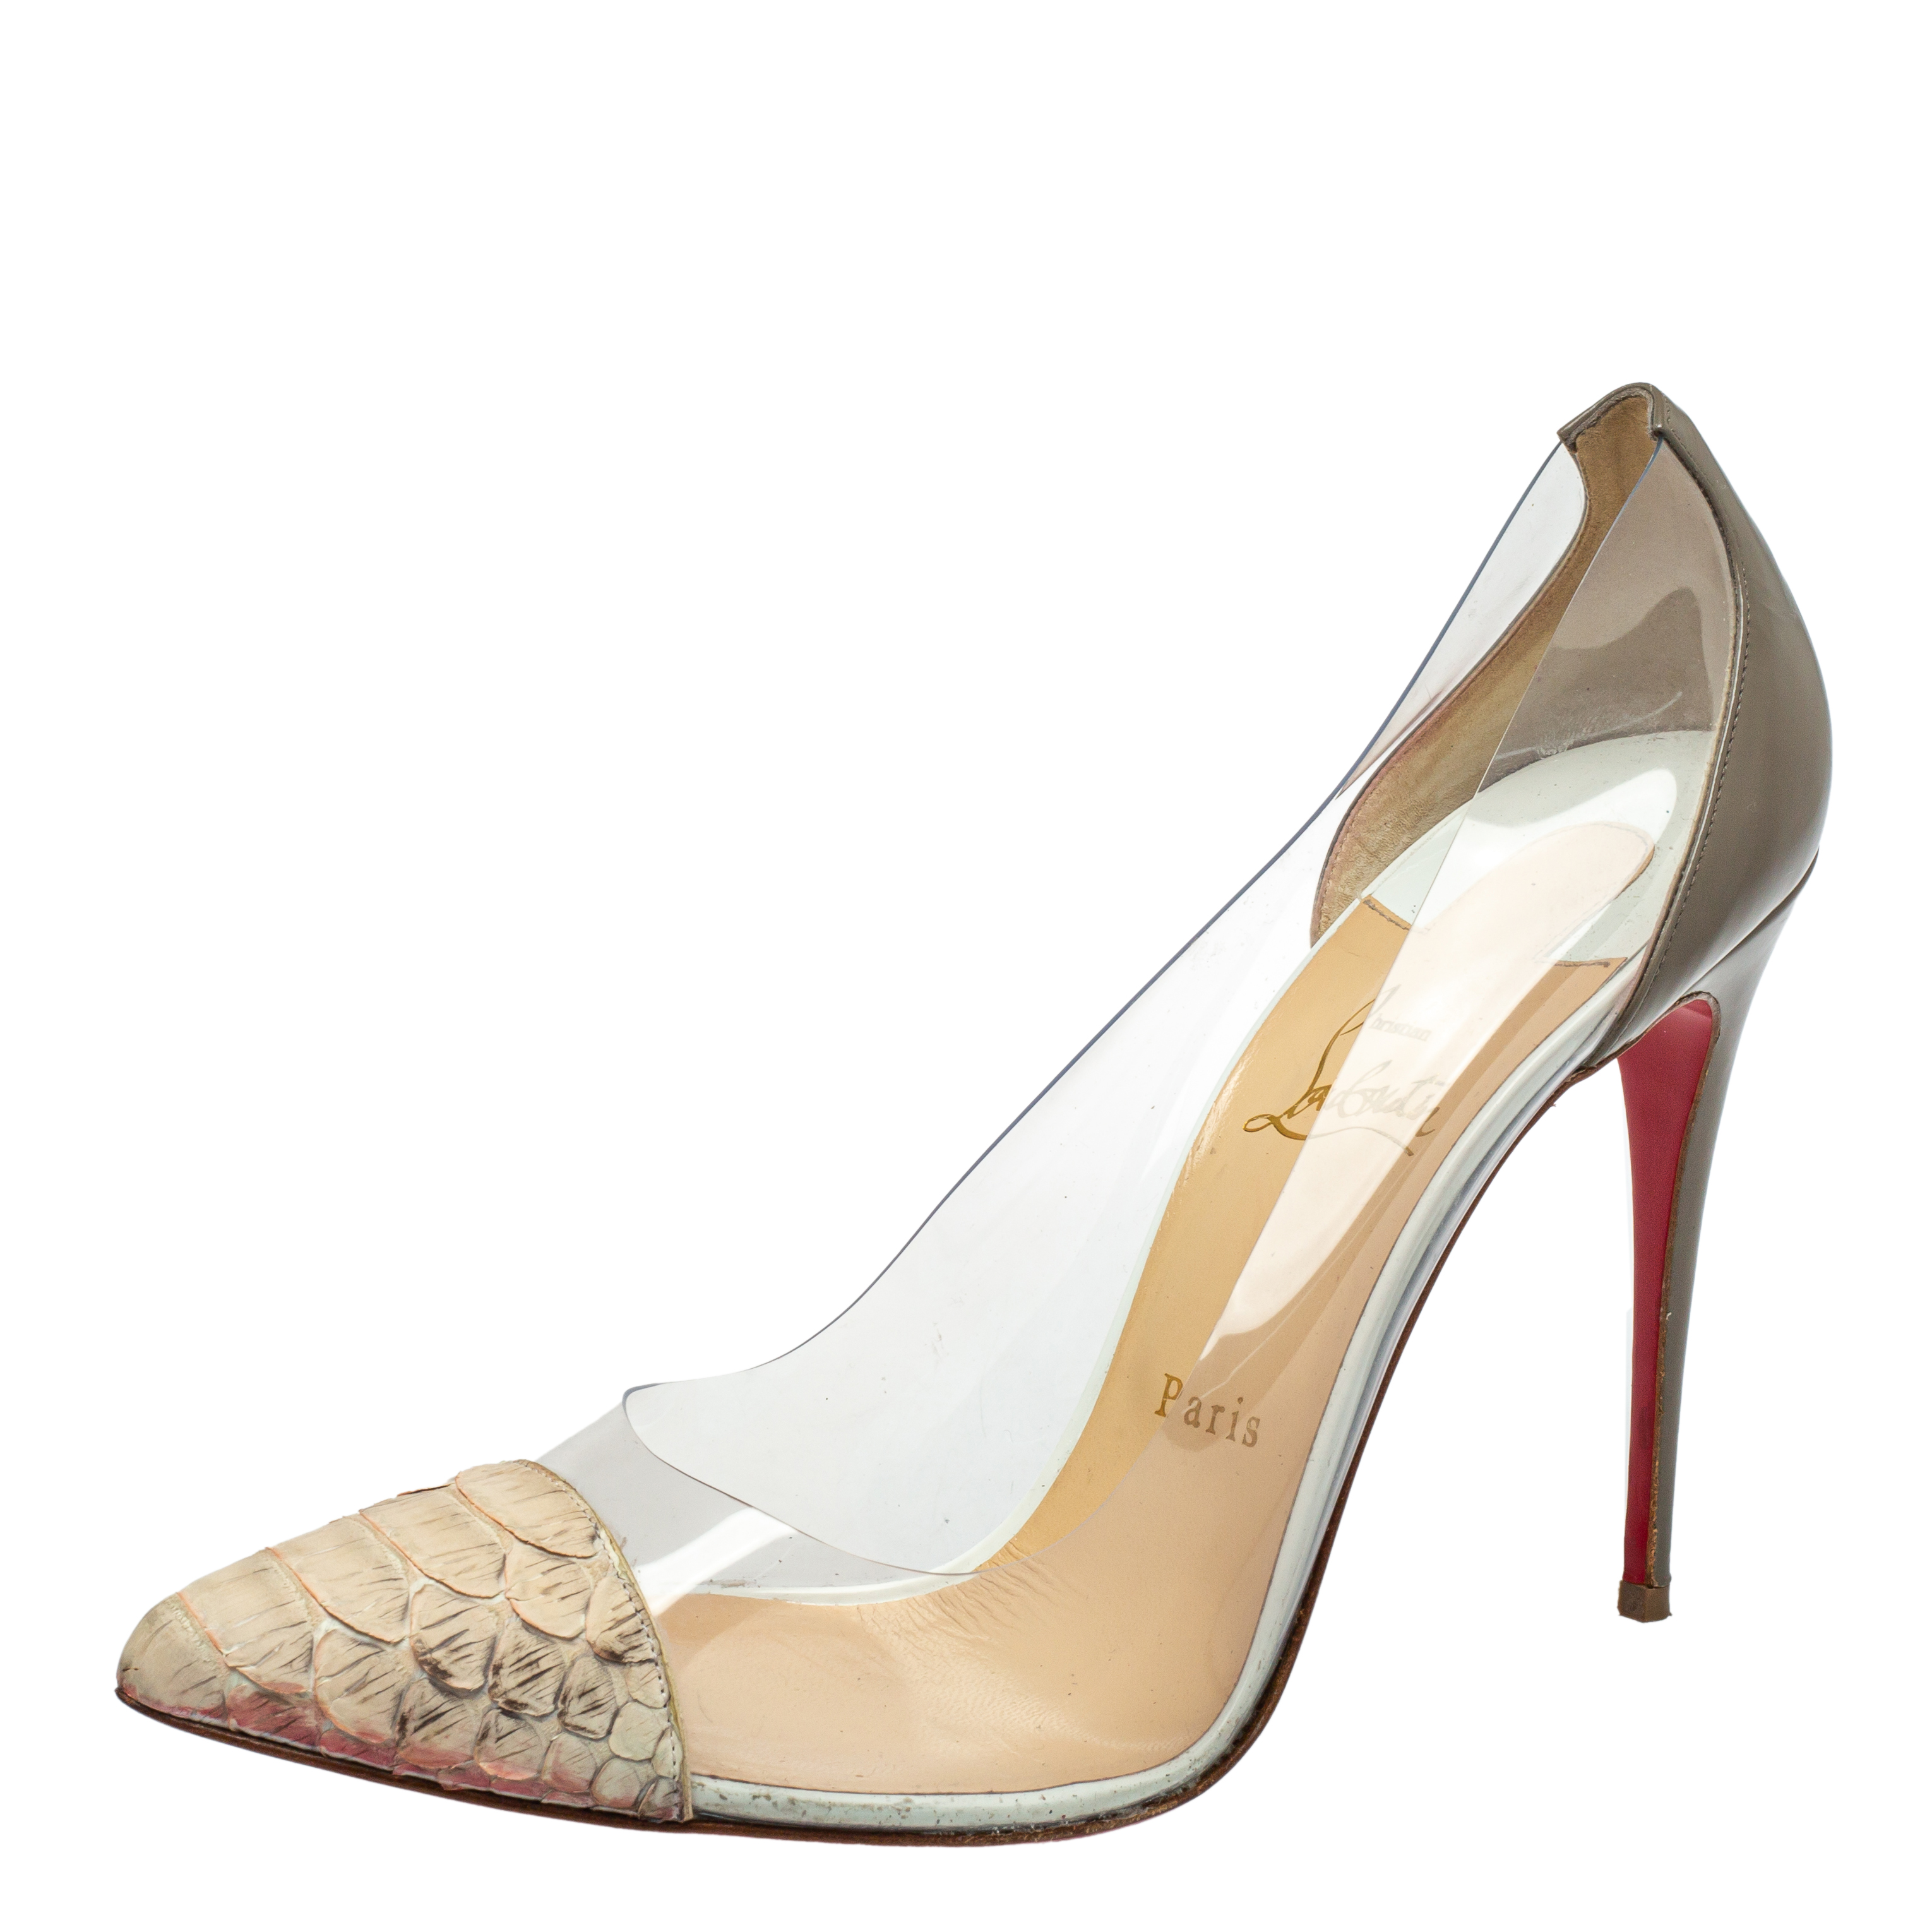 Christian Louboutin Cream/Grey Python Leather And PVC Pumps Size 41.5